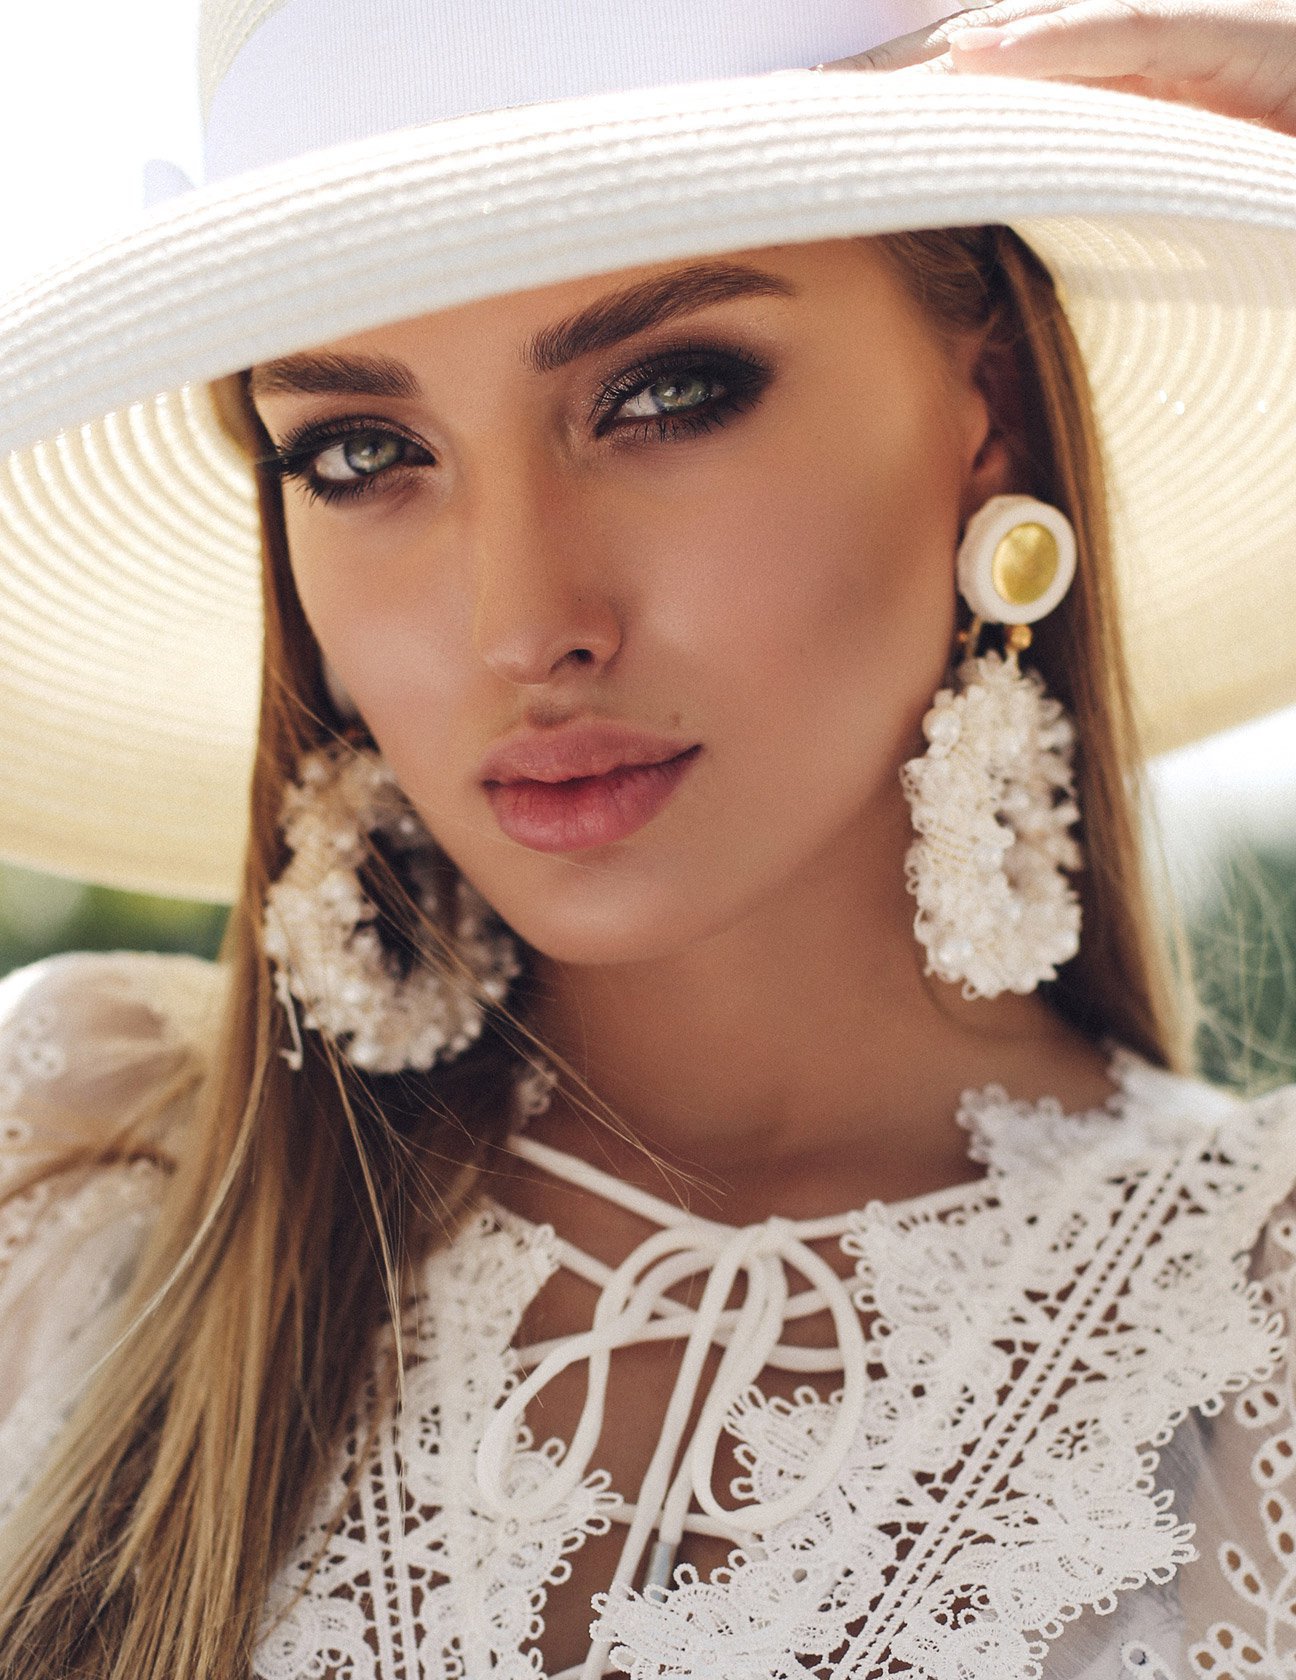 vivace rf microneedling patient model in a lacy white top and sun hat